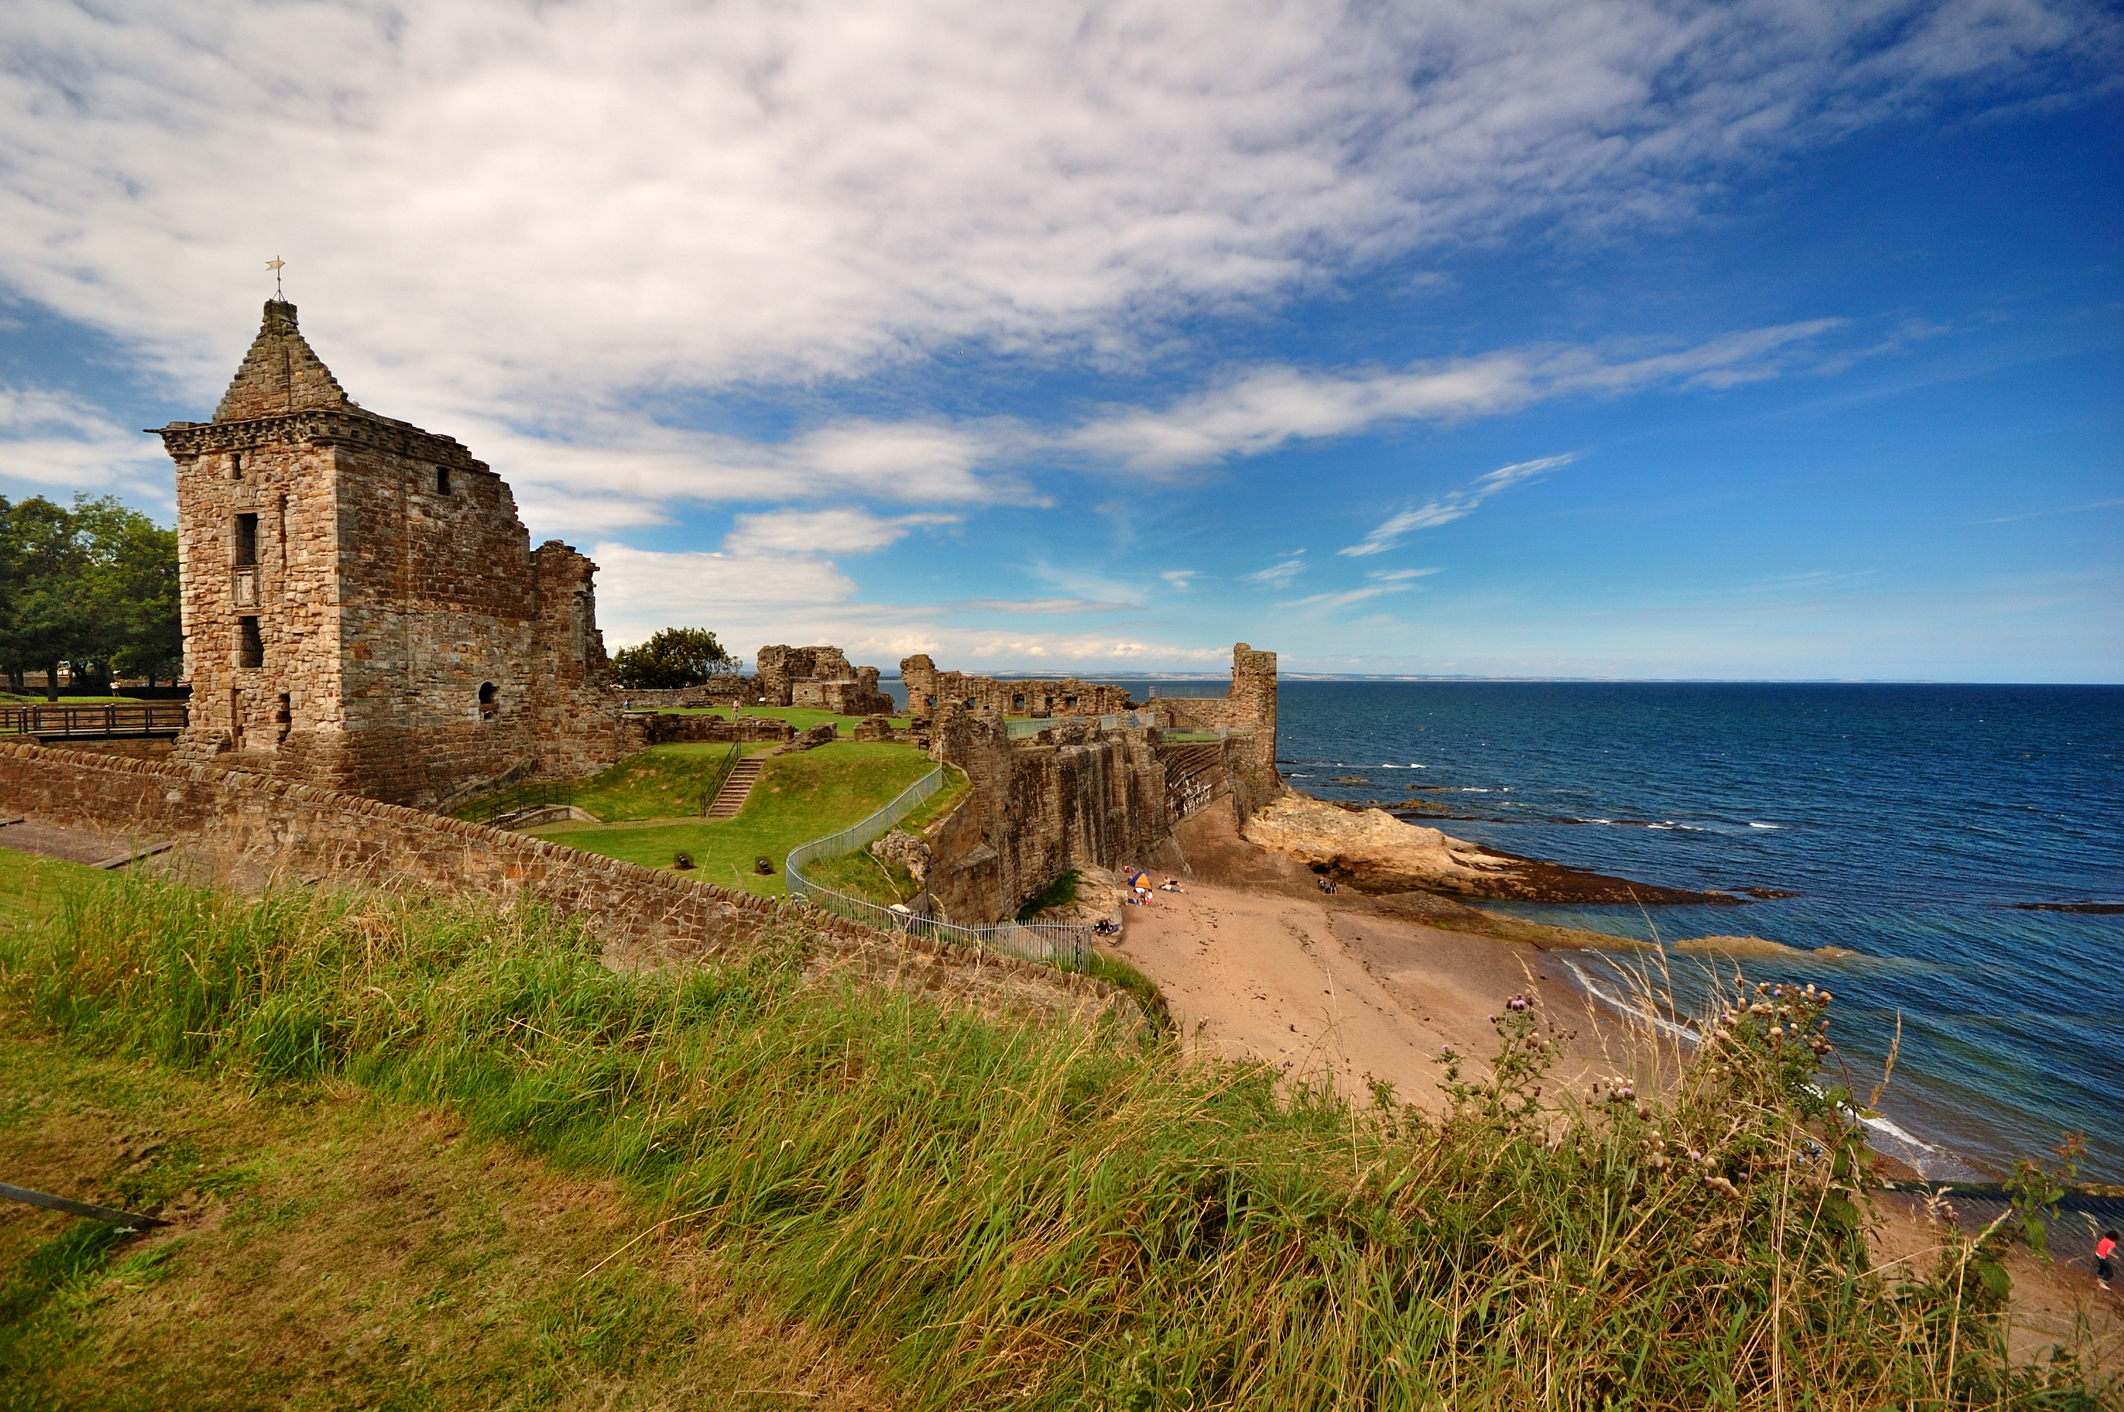 Flights to Scotland in the $400s and $500s round-trip